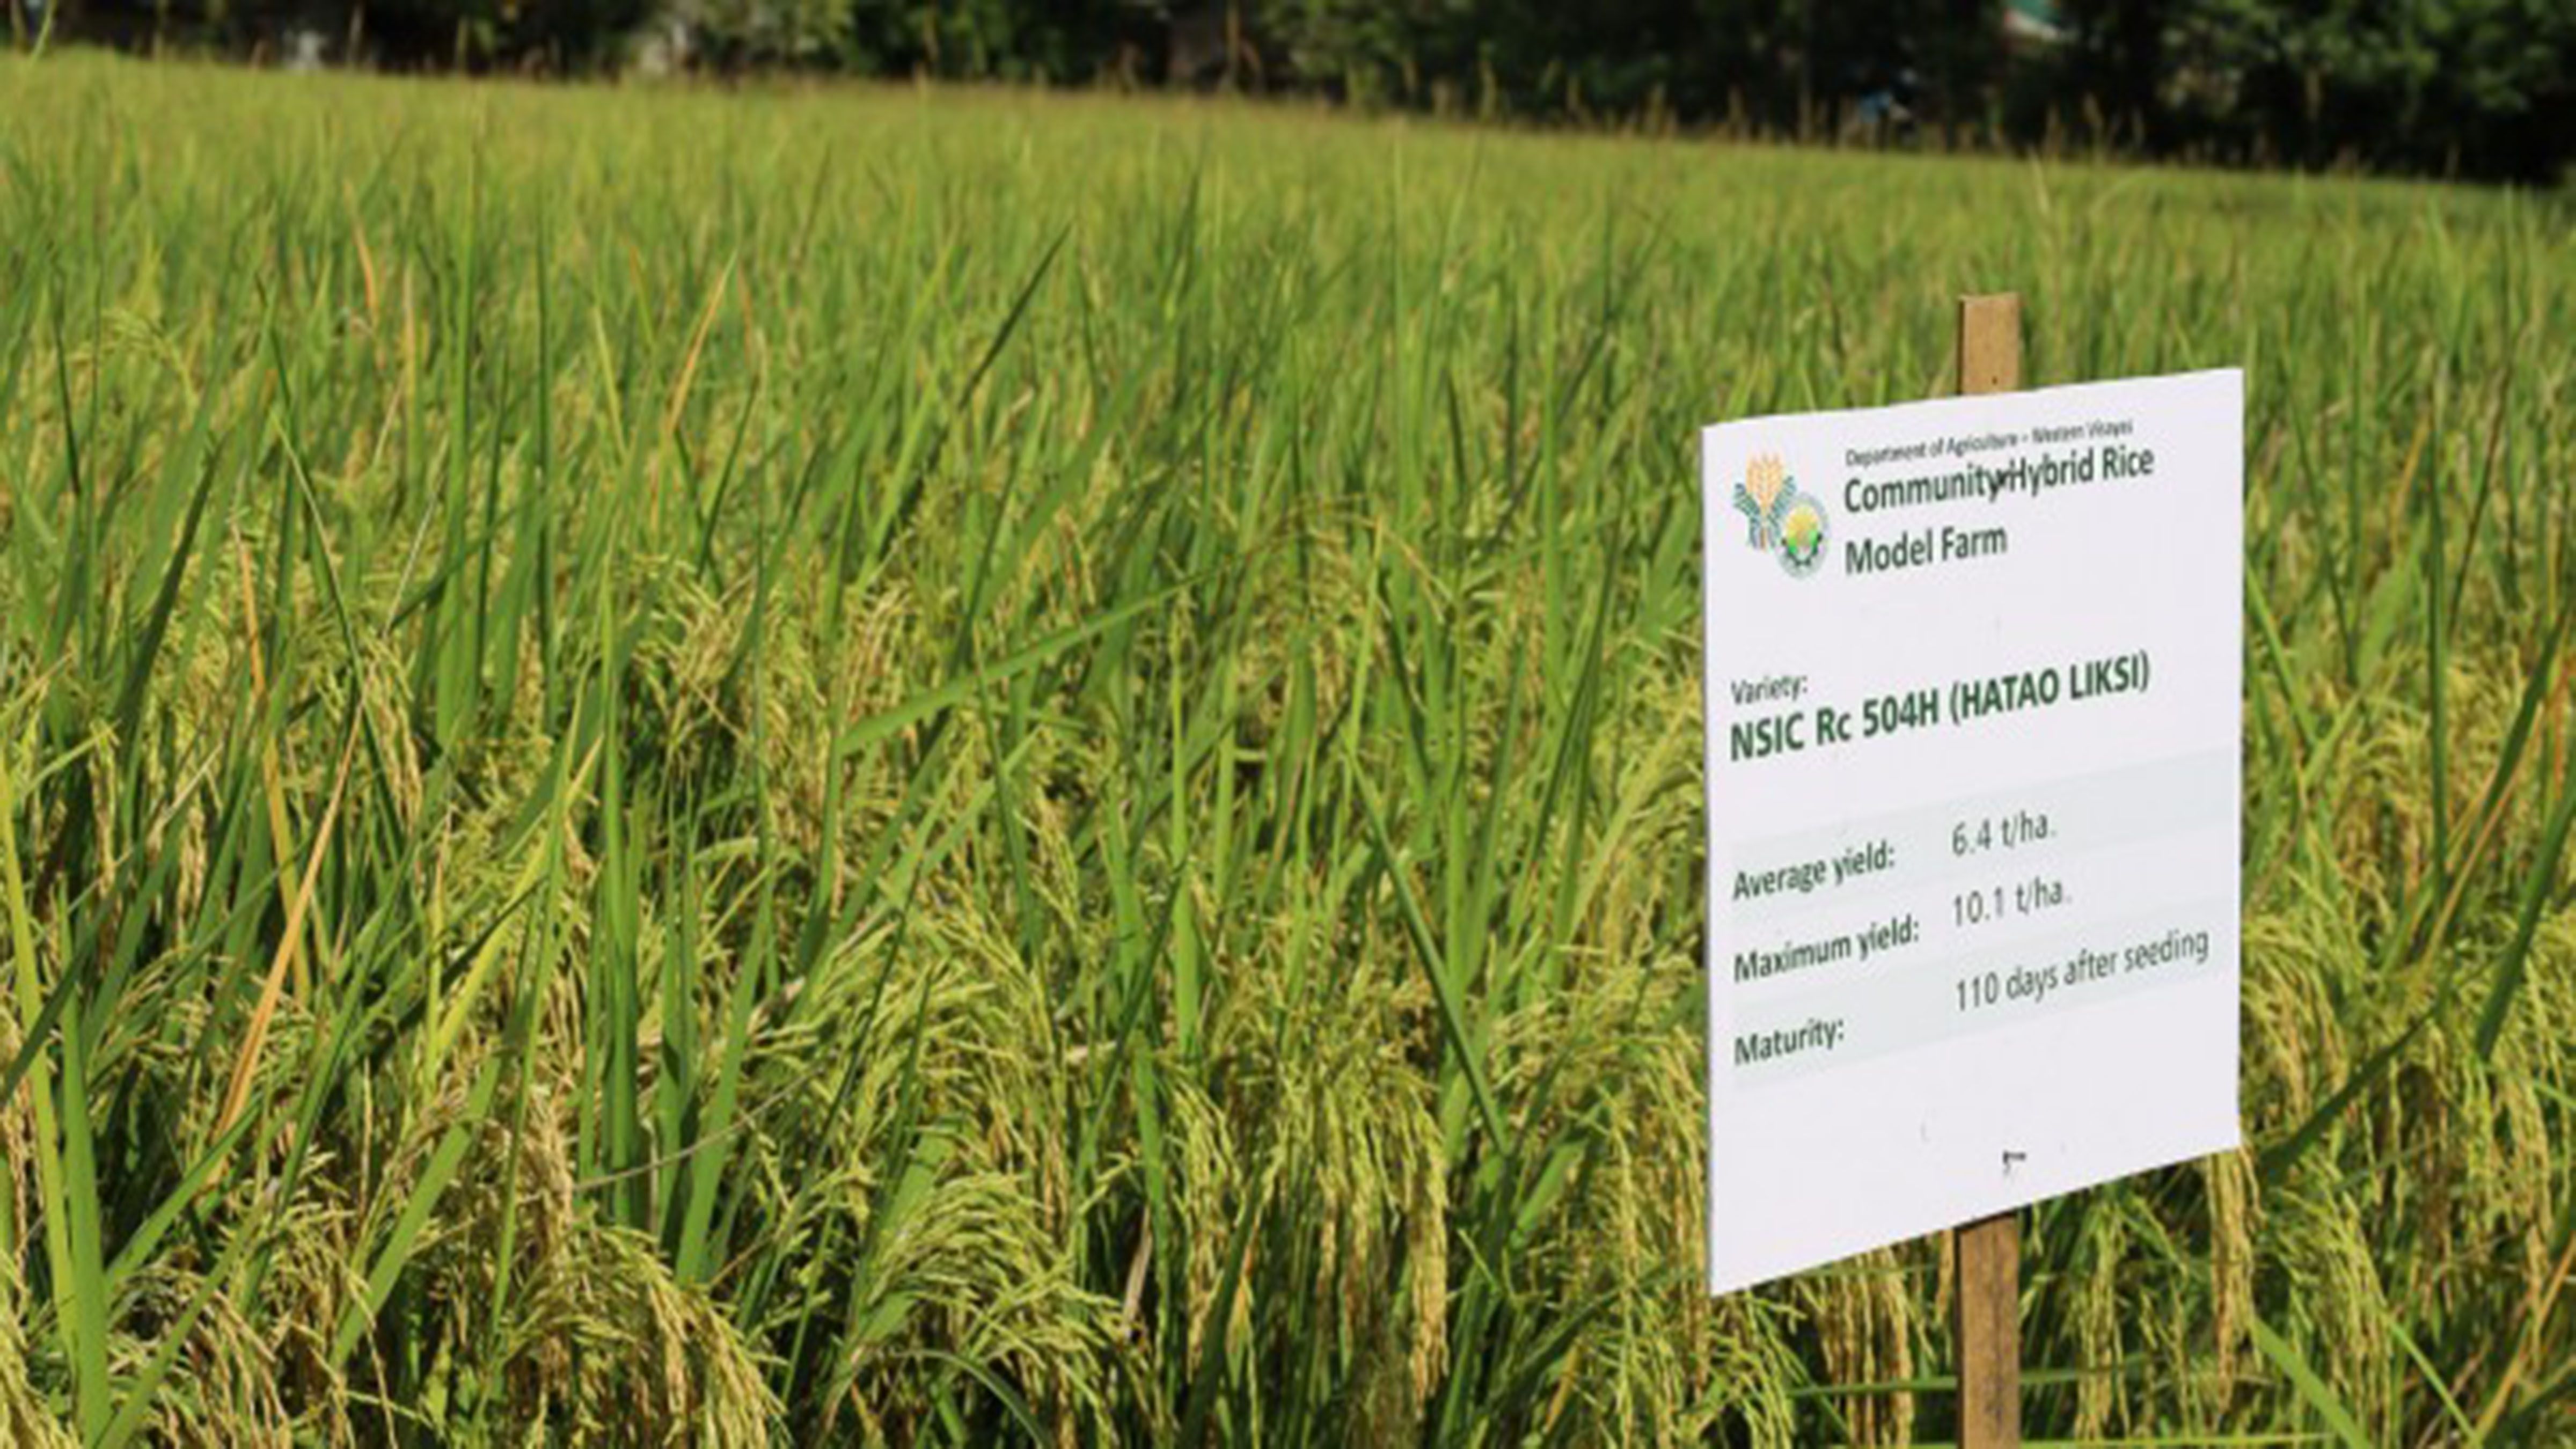 Hybrid rice for self sufficiency